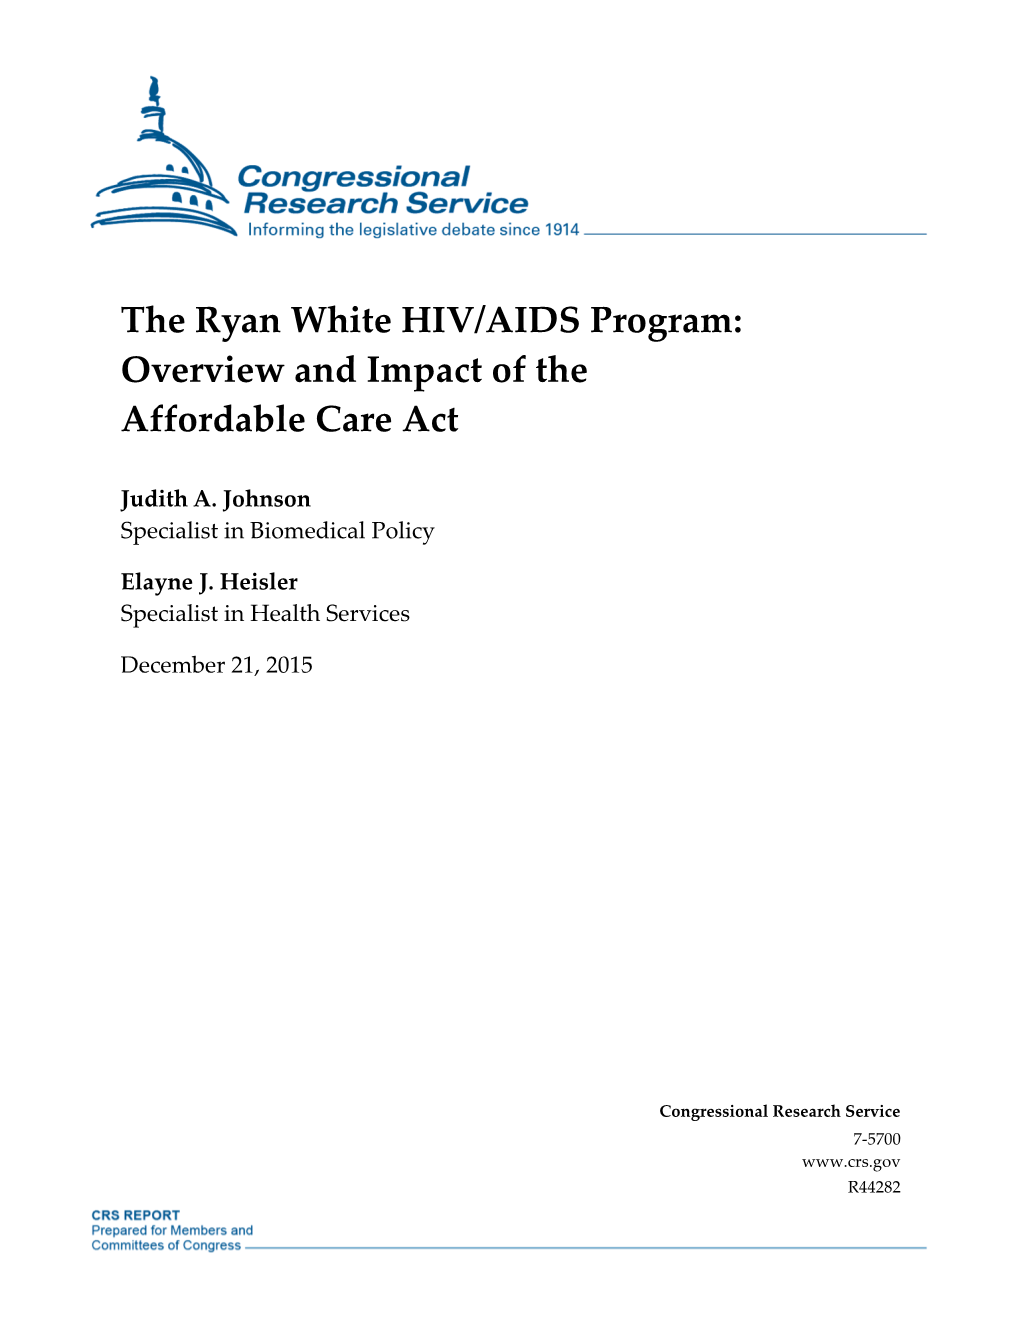 The Ryan White HIV/AIDS Program: Overview and Impact of the Affordable Care Act